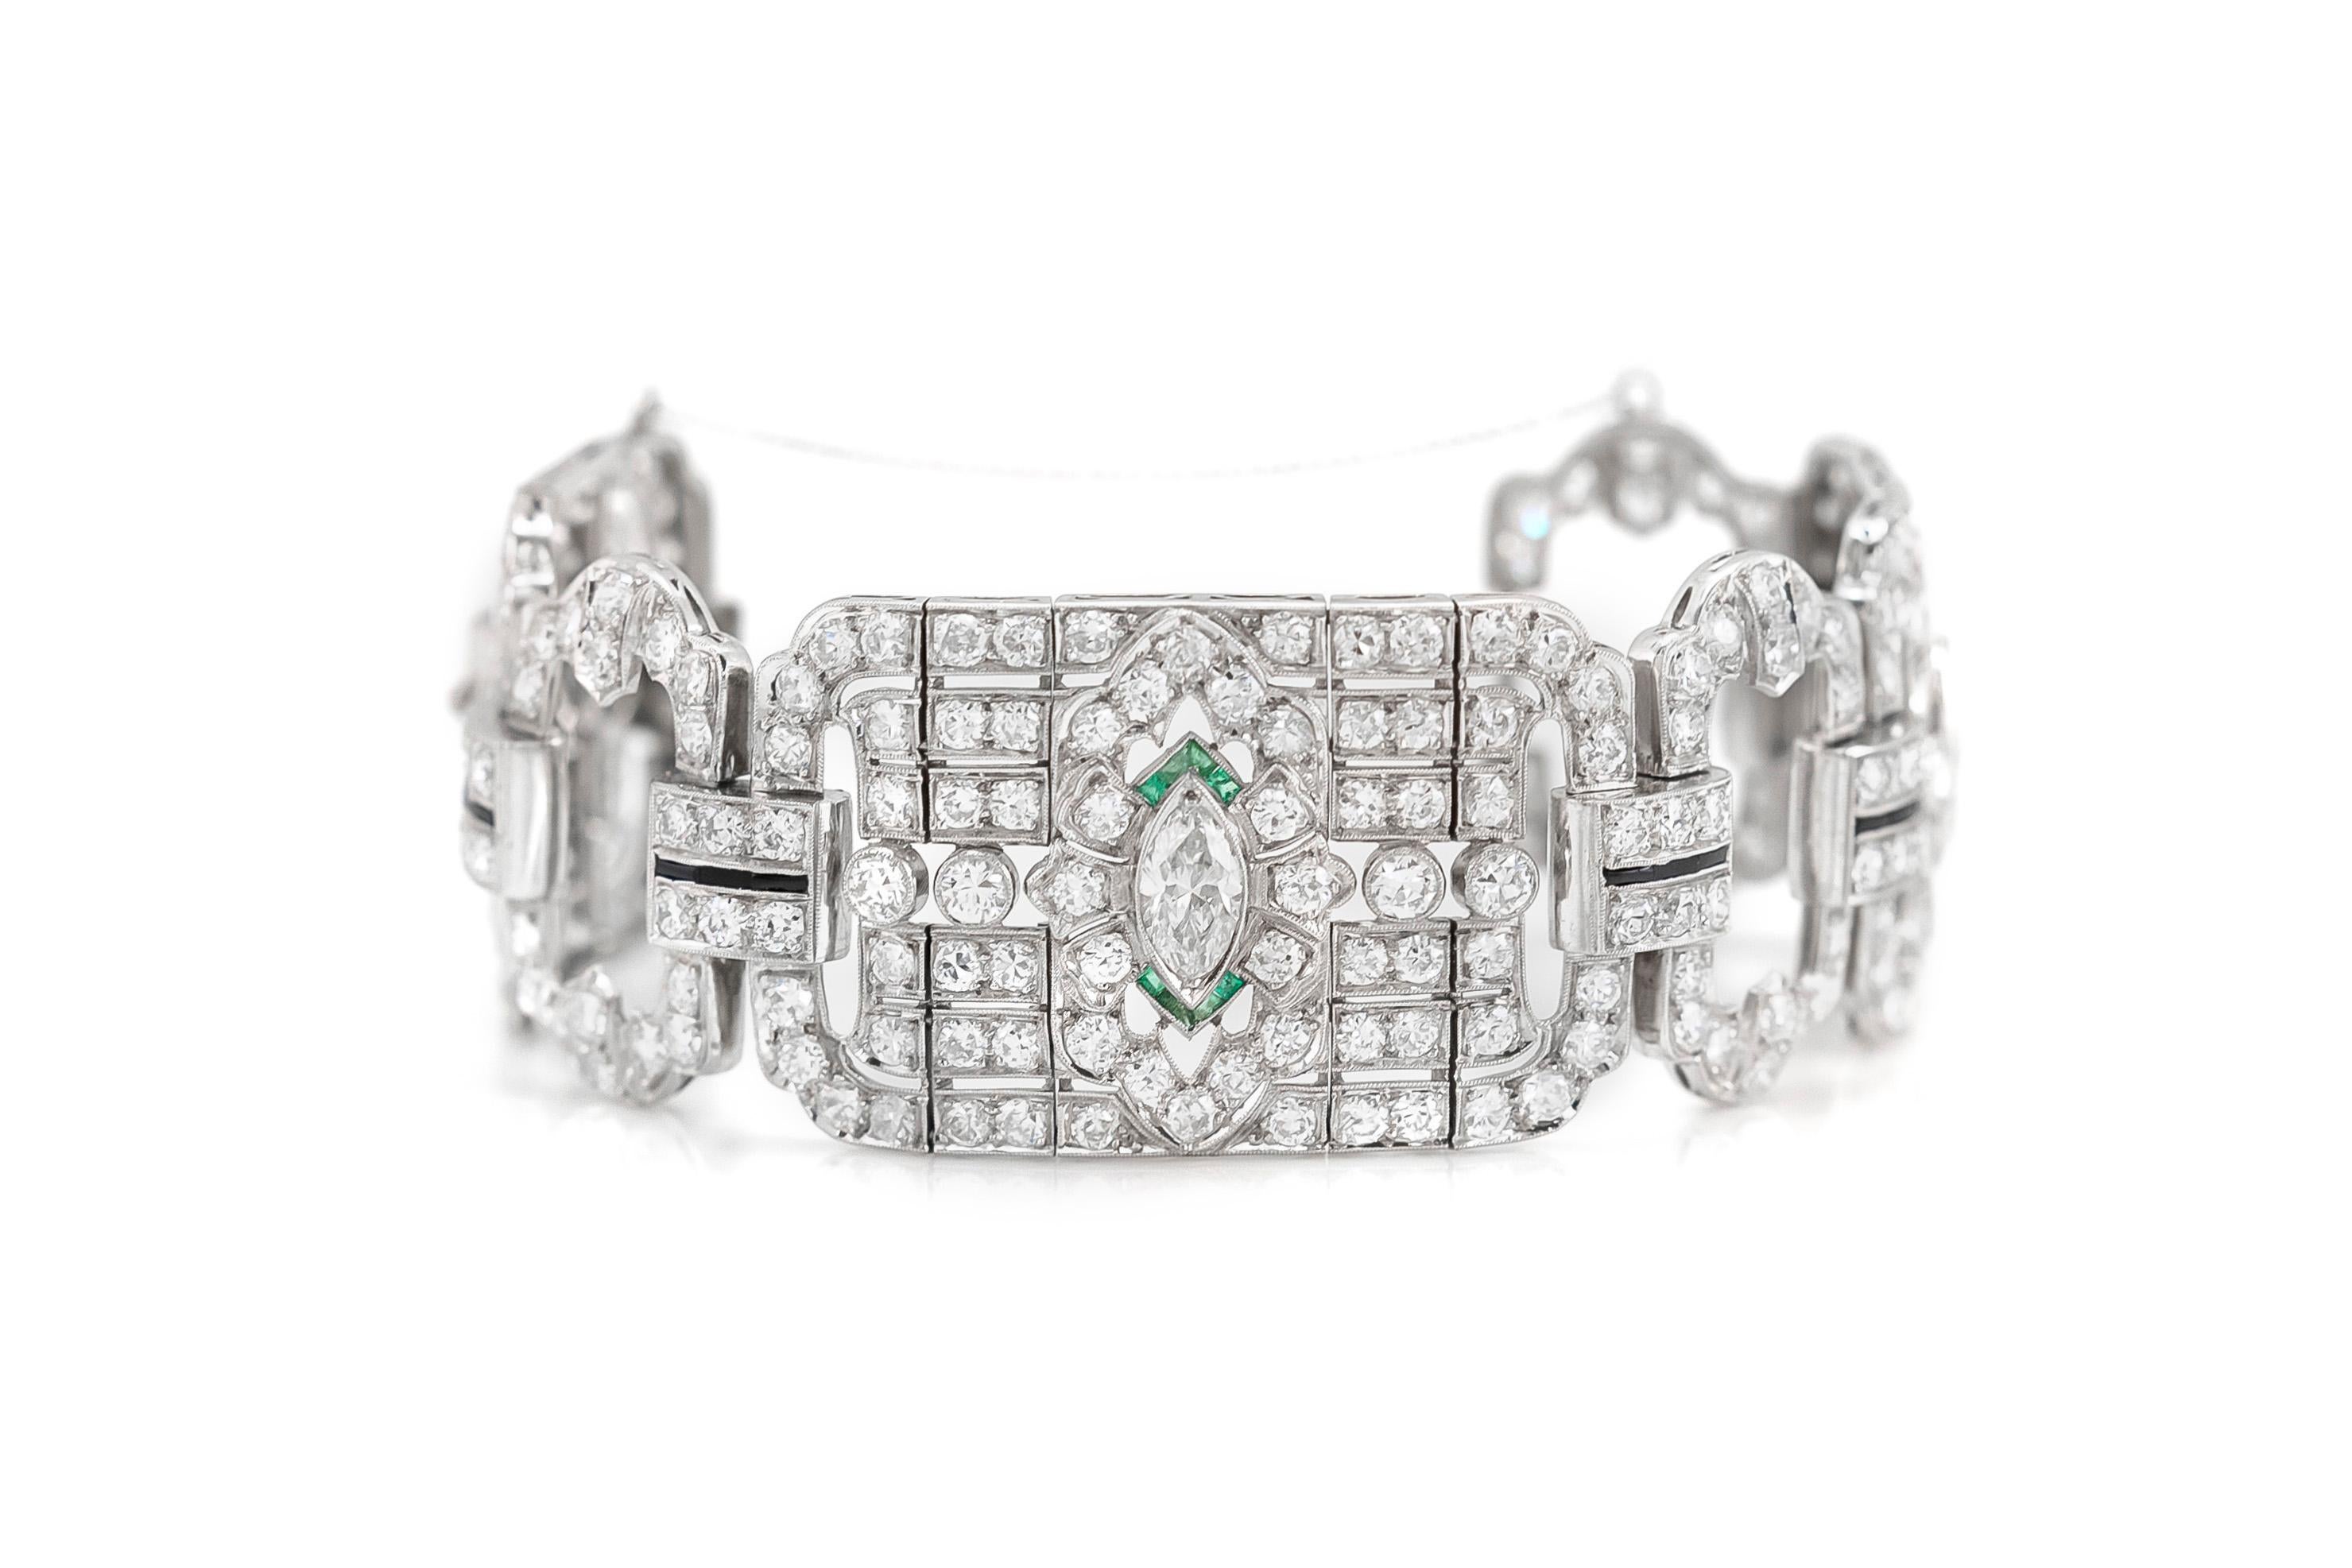 1930s Platinum Emerald Diamond and Onyx Bracelet In Excellent Condition For Sale In New York, NY